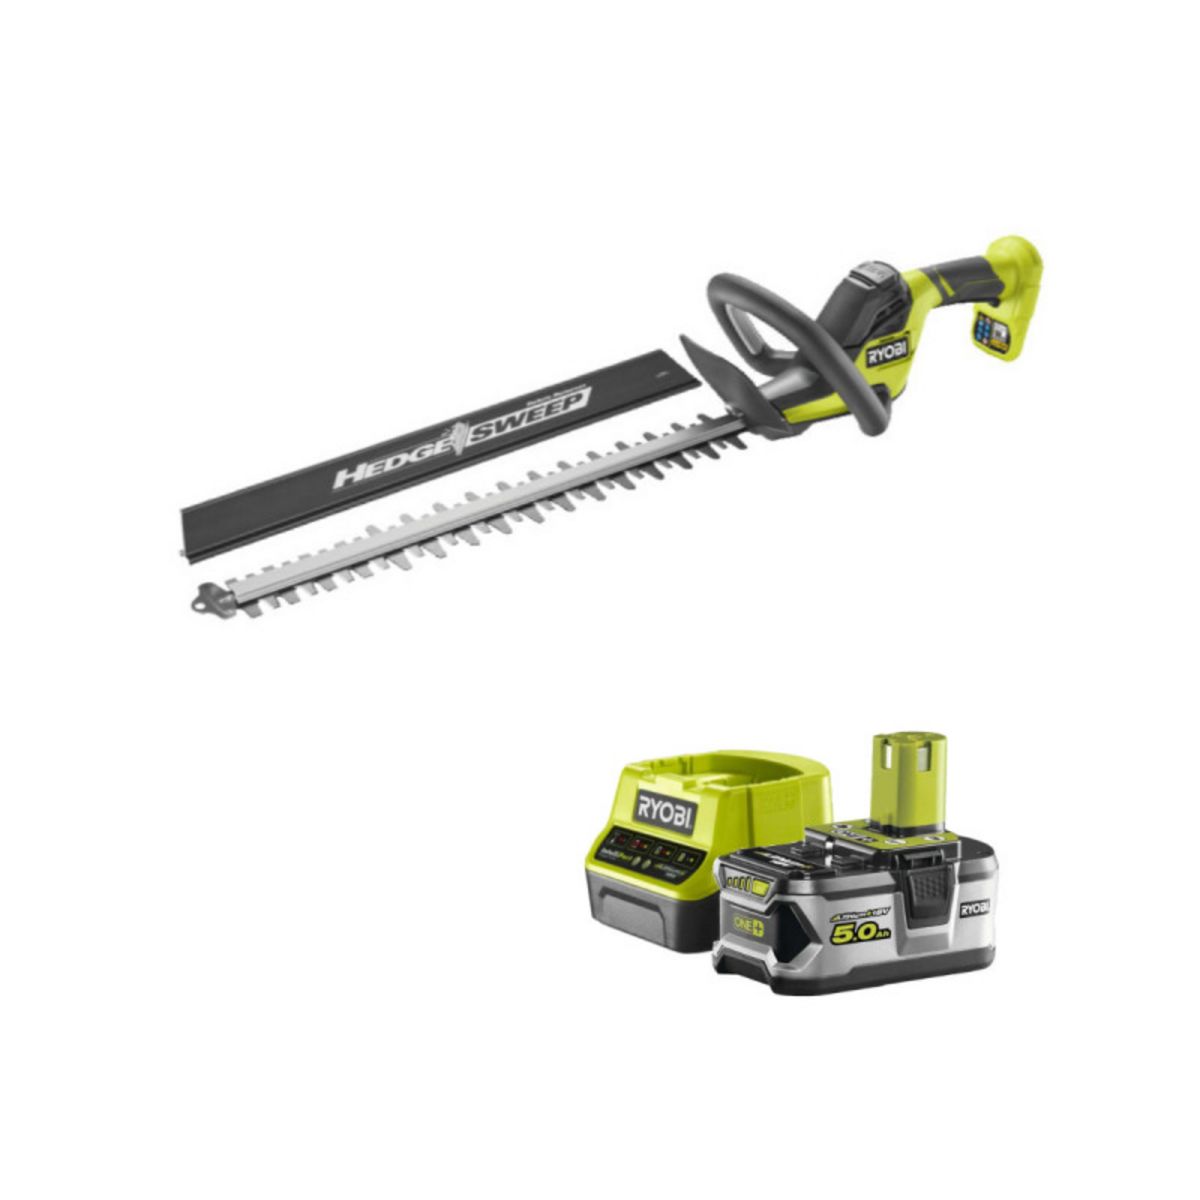 Ryobi Pack RYOBI Taille-haies 18V OnePlus Brushless LINEA 45 cm RY18HT45A-0 - 1 Batterie 5.0Ah - 1 Charge